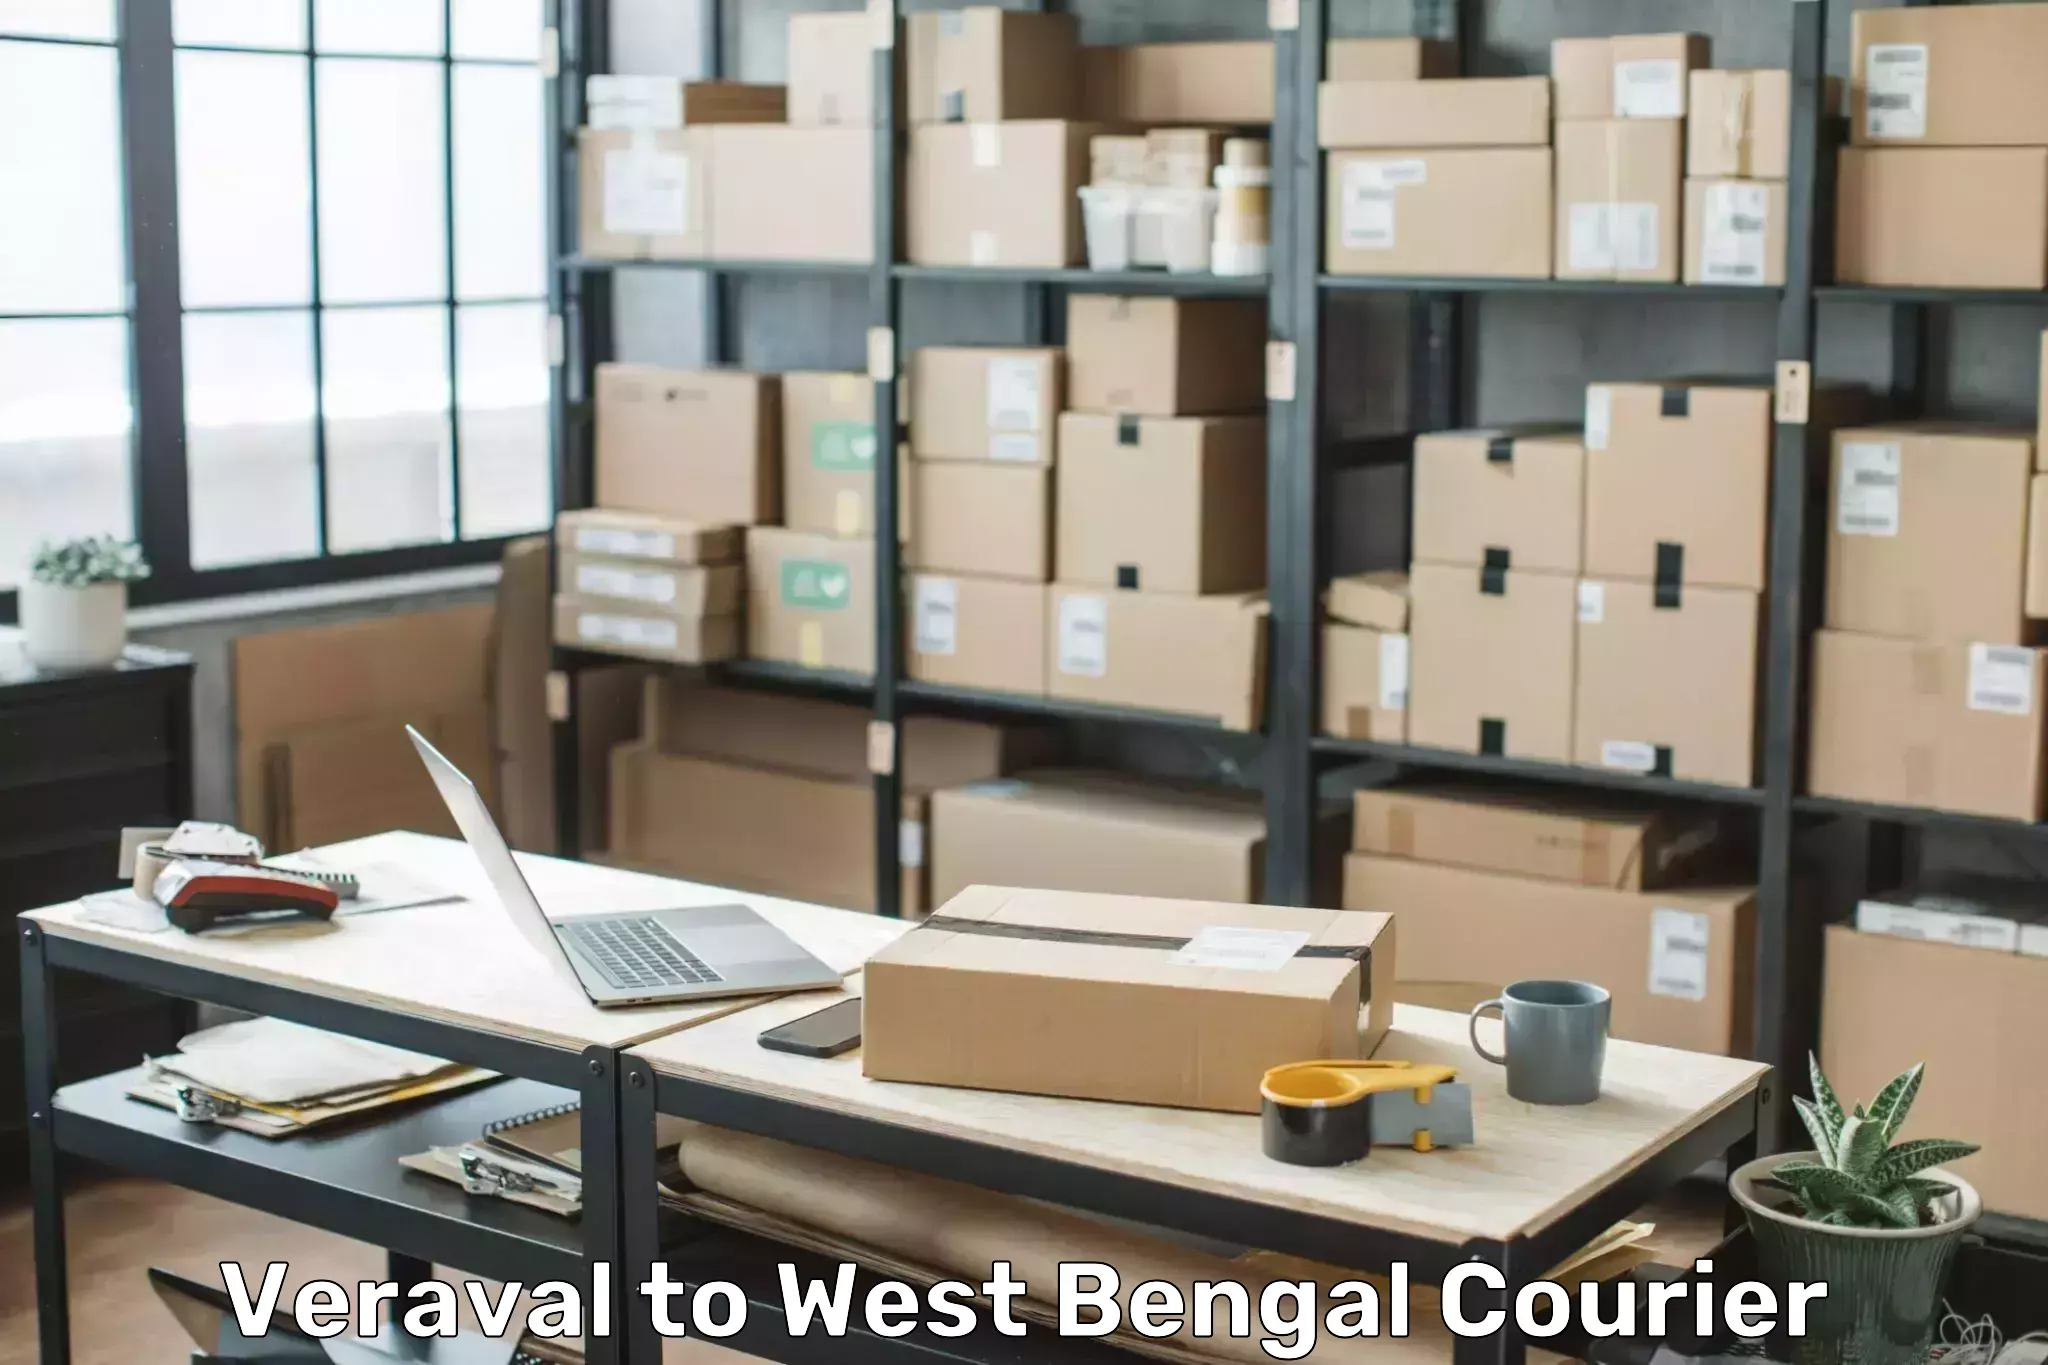 Luggage transport consultancy Veraval to West Bengal